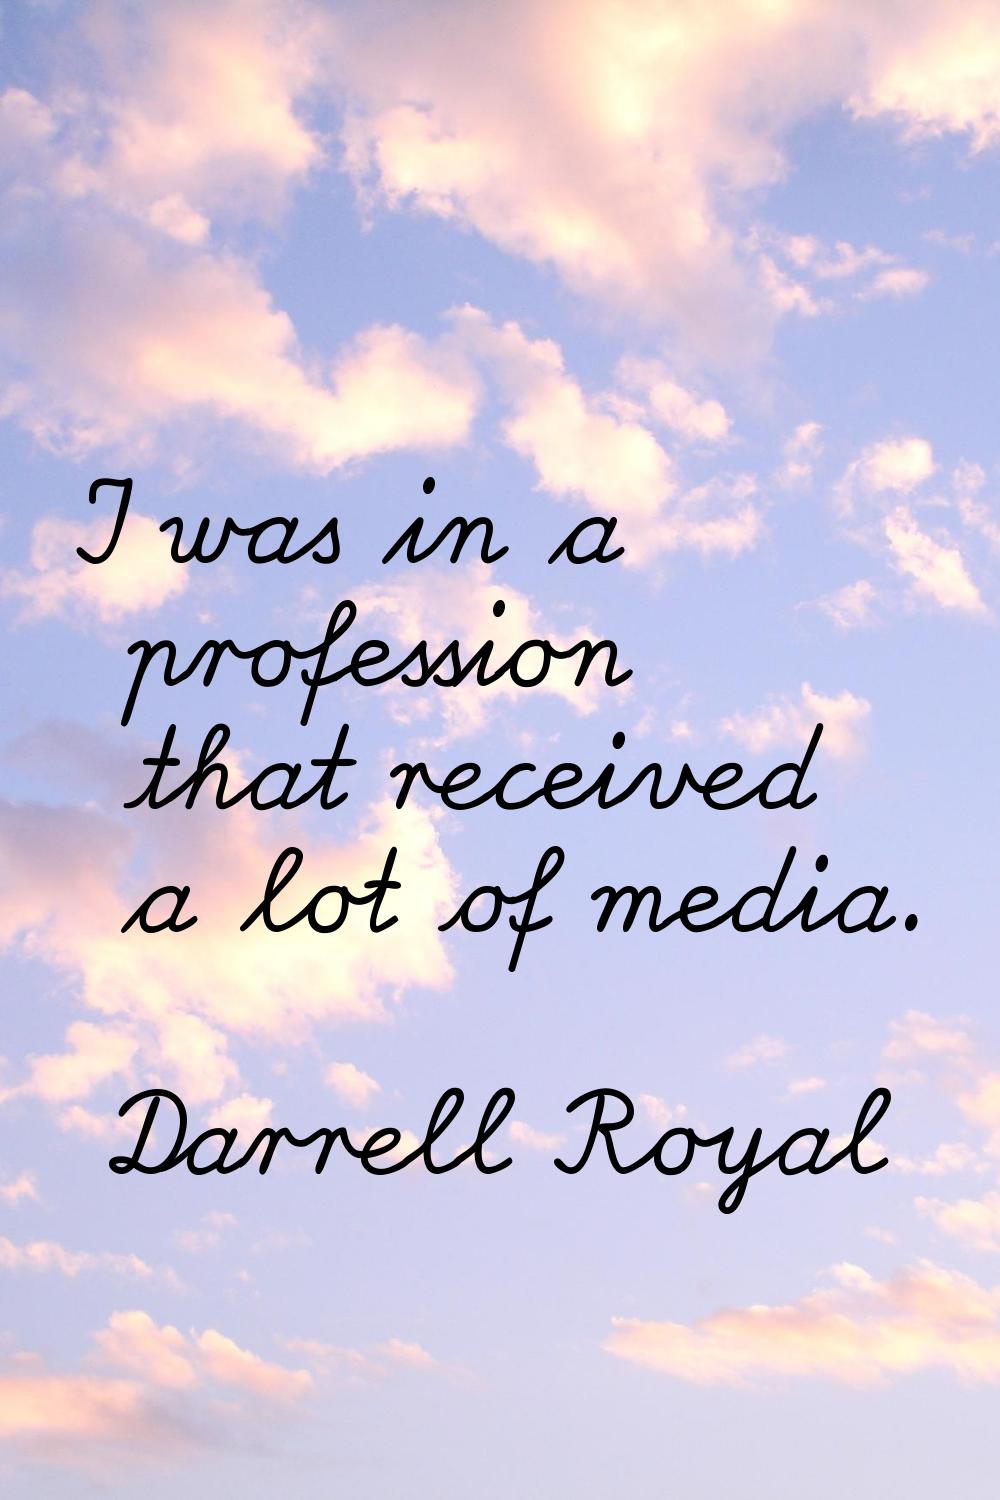 I was in a profession that received a lot of media.